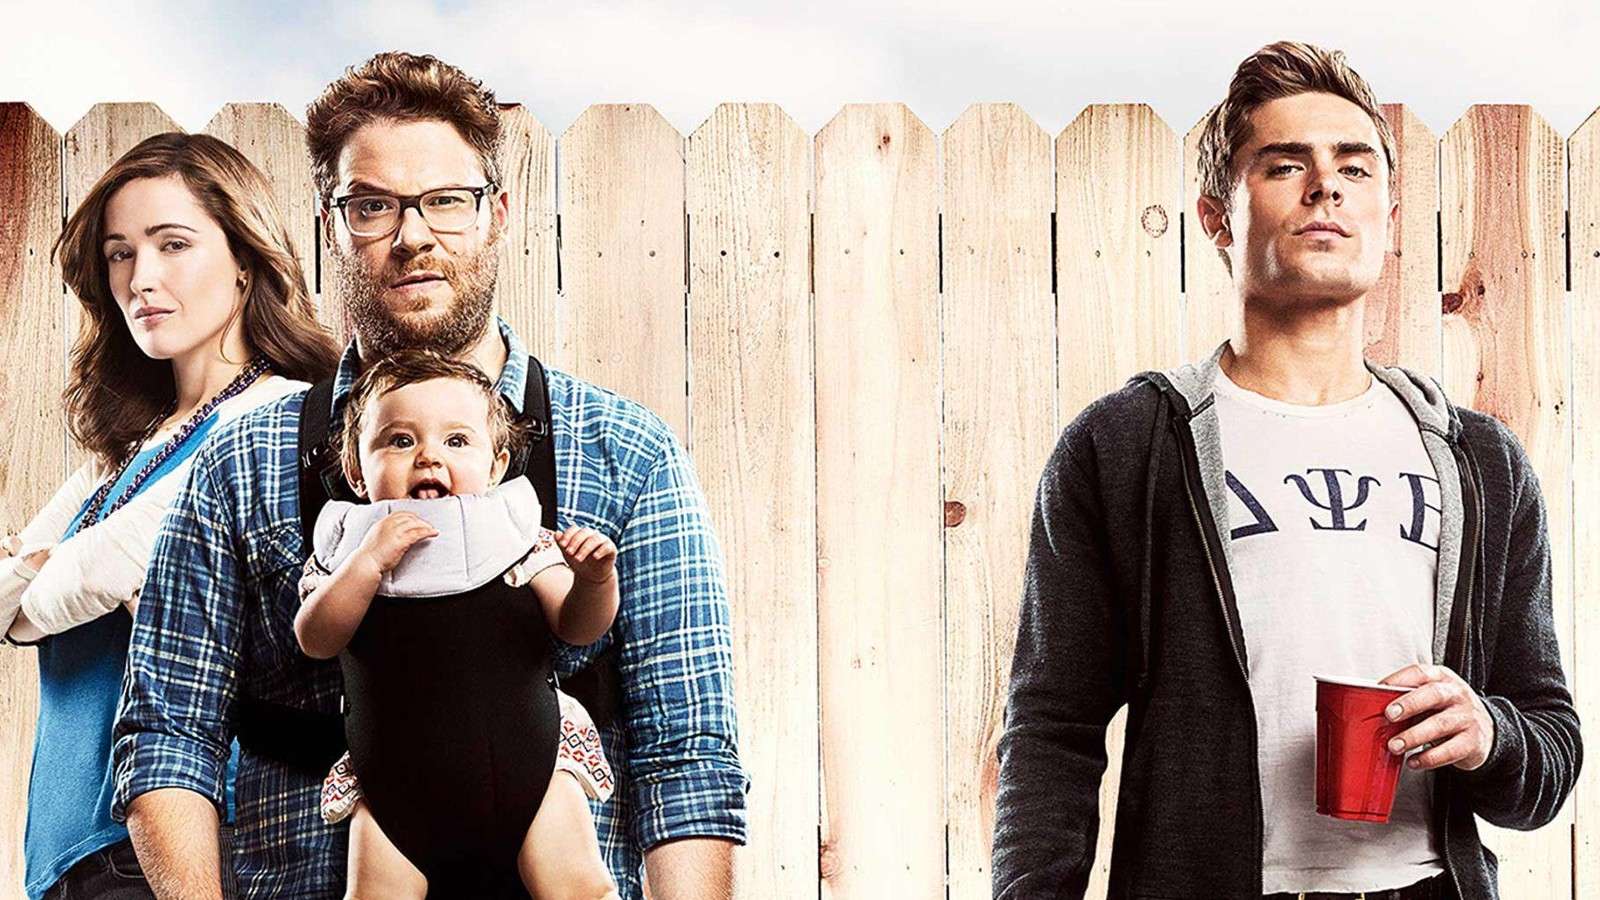 Rose Byrne, Seth Rogen and Zack Efron on the Neighbors poster.